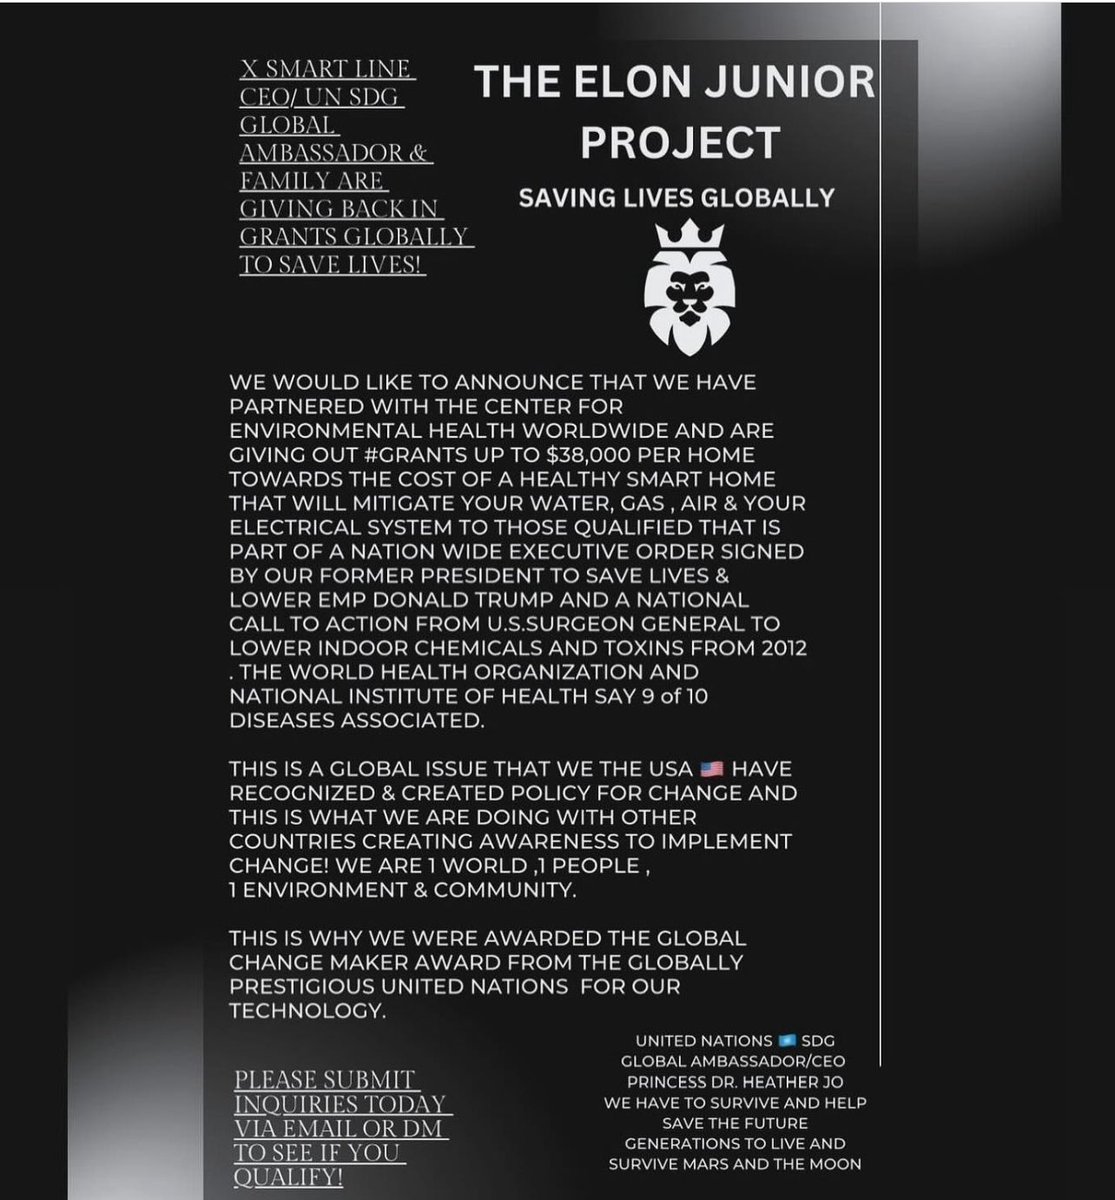 New Name! “THE ELON JUNIOR PROJECT” AVAILABLE NOW! Our  #legacy to the #world 🌎 The #future @UN SDG Global Ambassador #ussurgeongeneral #NATIONALCALLTOACTION #EXECUTIVEORDER #GRANTS FOR HEALTHY SMART 🏨 SOME #INSURANCE WILL COVER & 100% #taxdeductible xhealthysmartline@yahoo.com